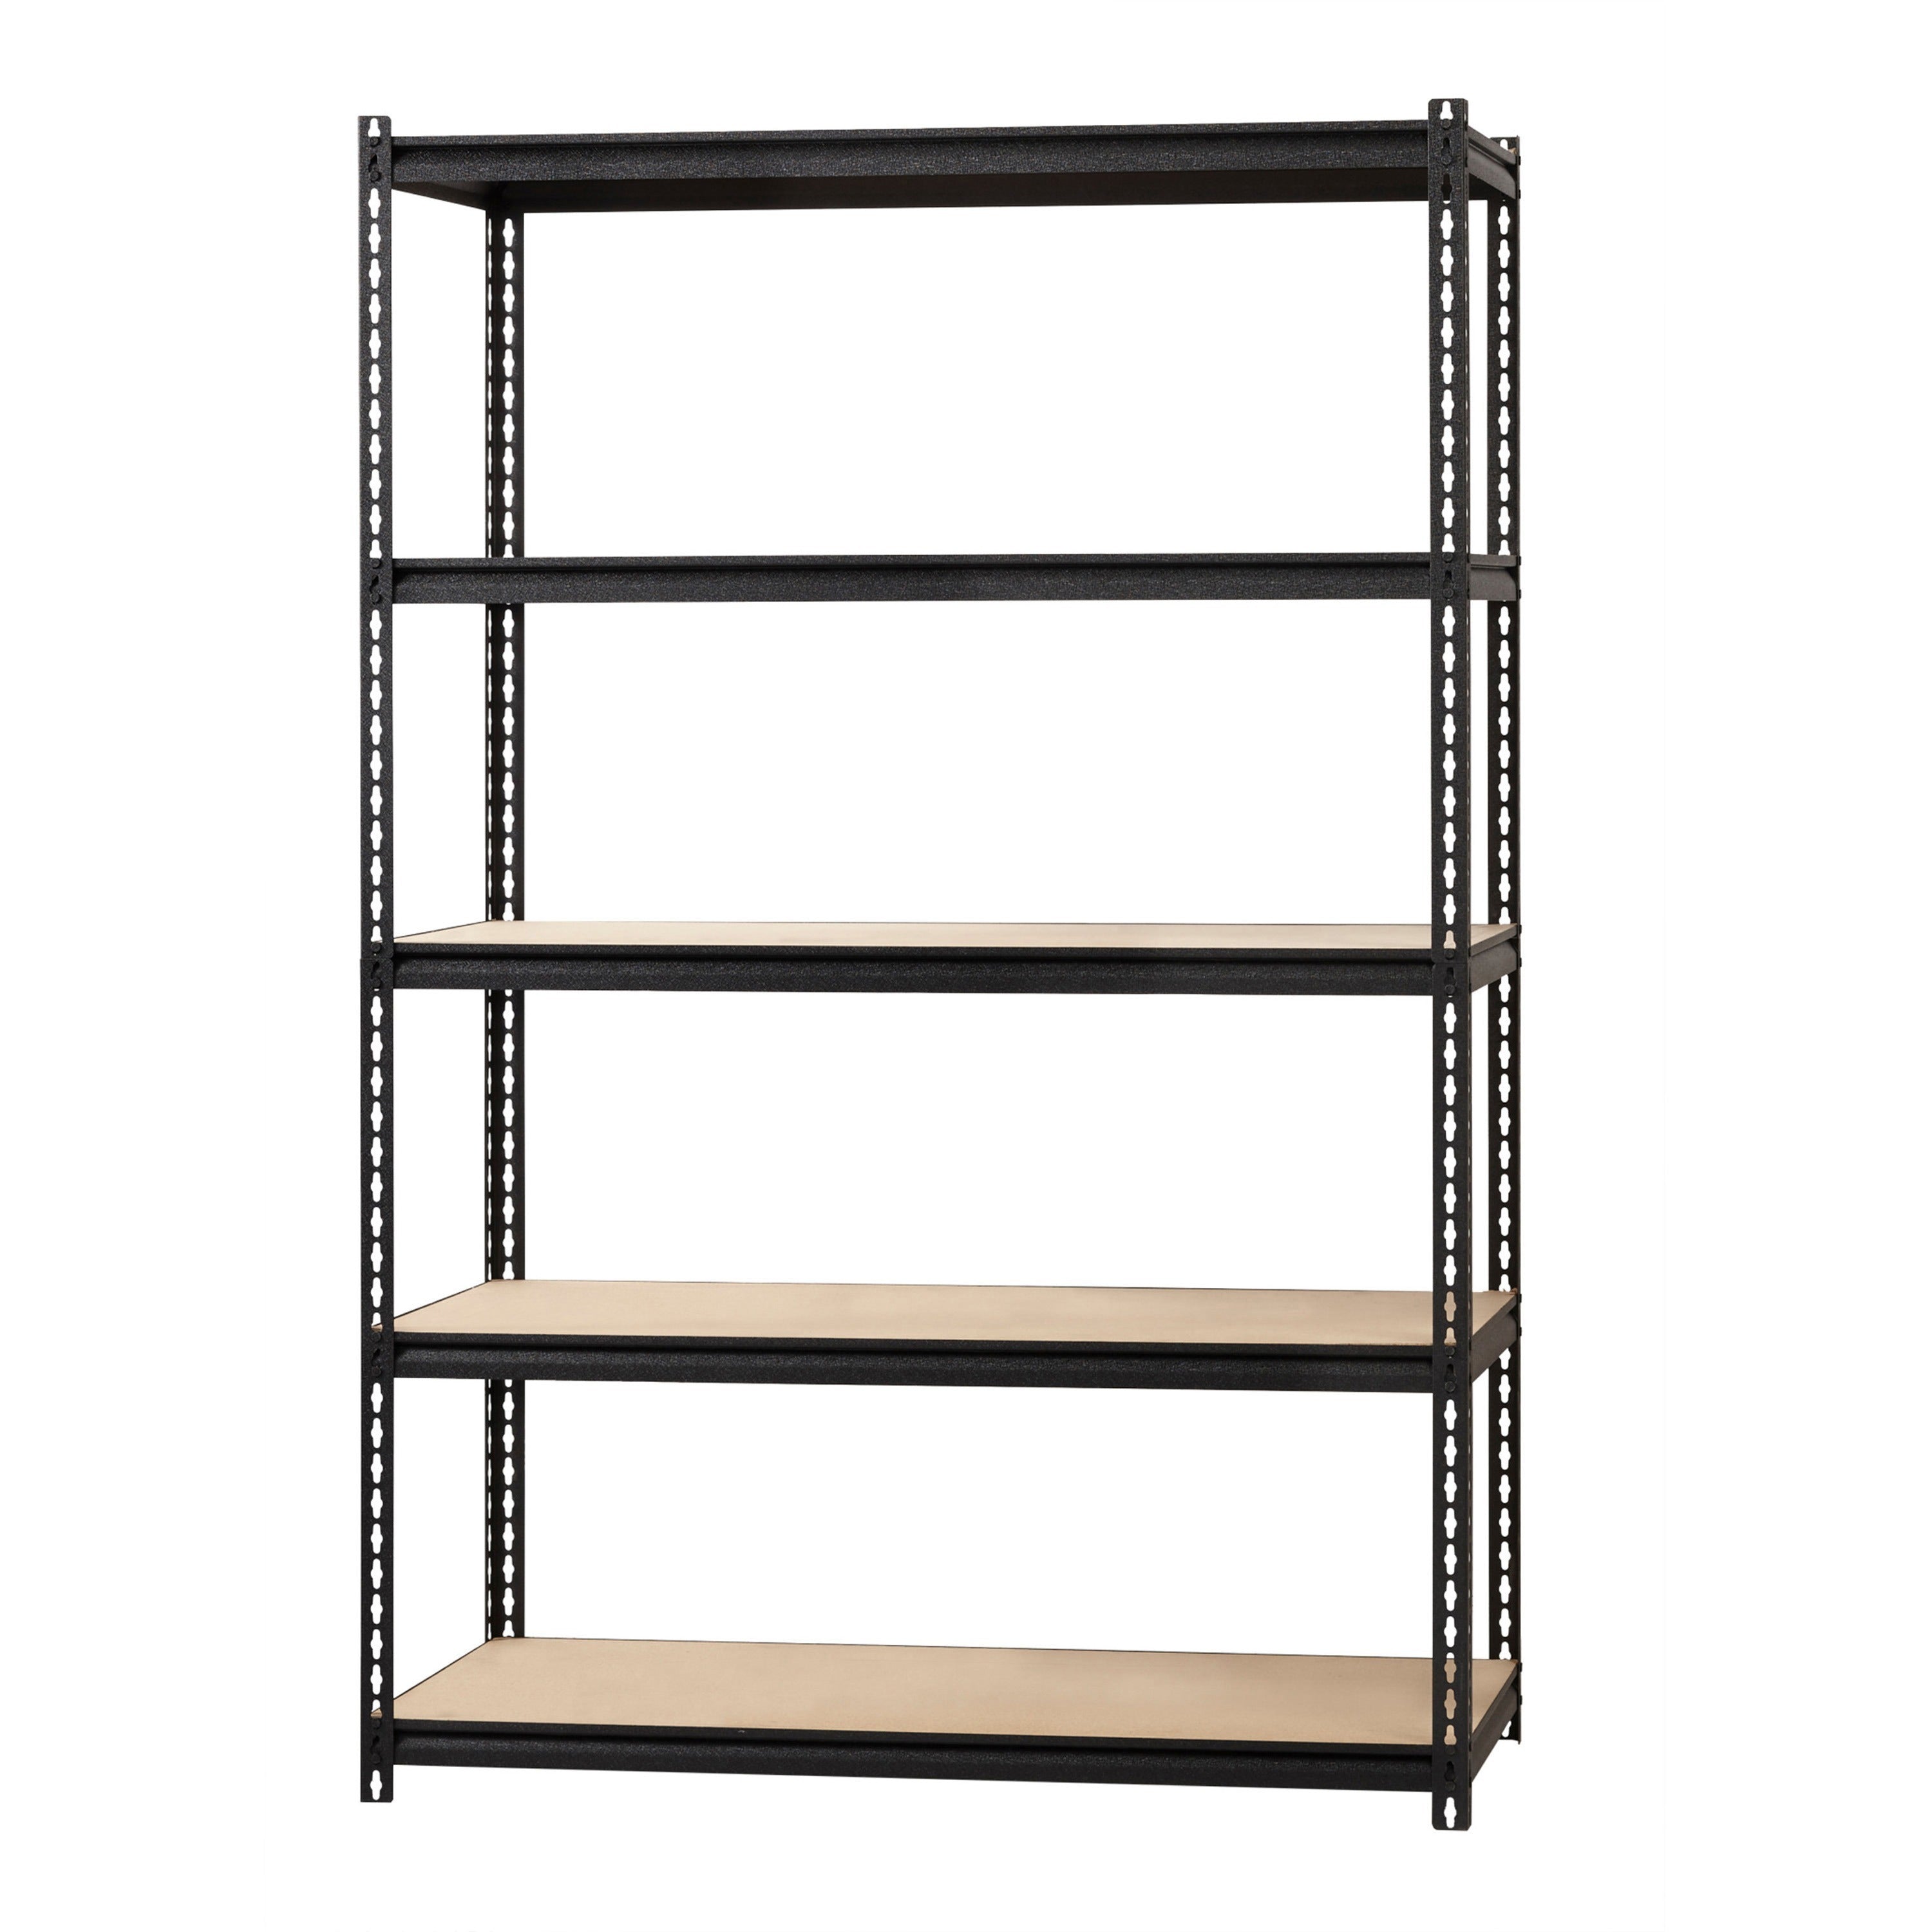 lorell-iron-horse-2300-lb-capacity-riveted-shelving-5-shelfves-72-height-x-48-width-x-18-depth-30%-recycled-black-steel-particleboard-1-each_llr59698 - 3